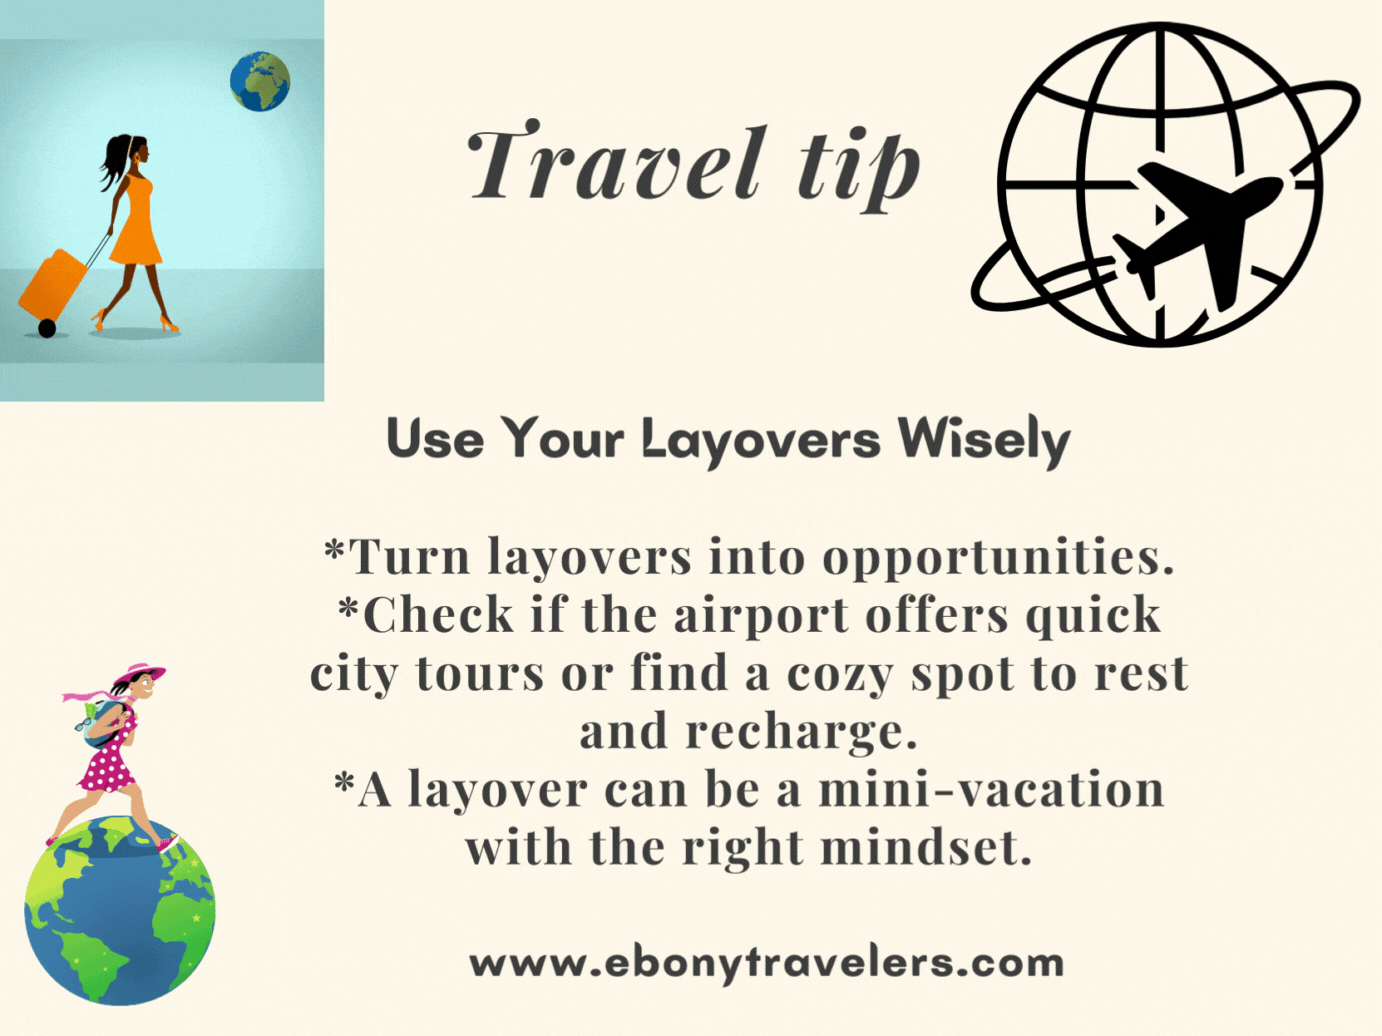 Use Your Layovers Wisely.gif